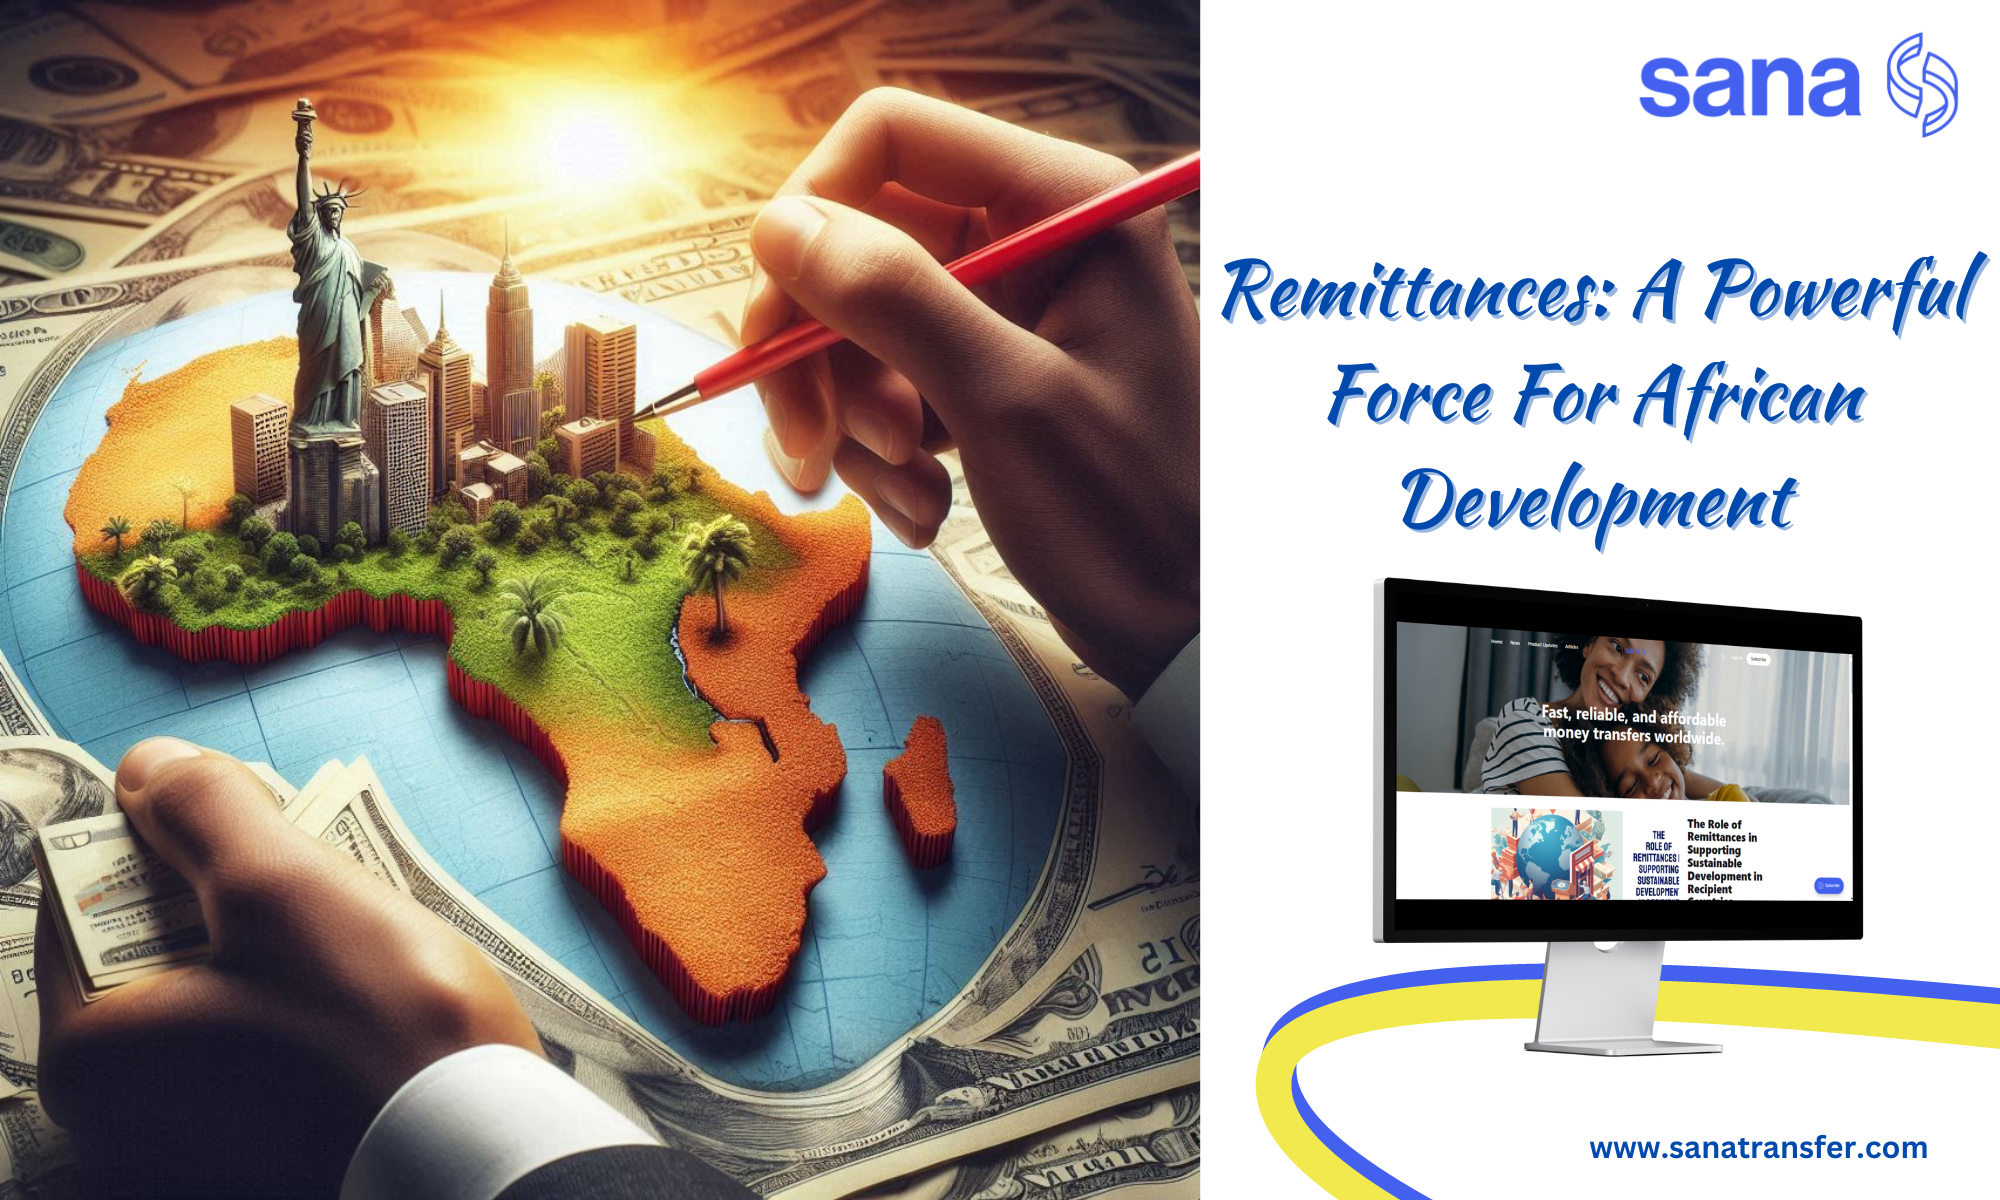 Remittances: A Powerful Force for African Development